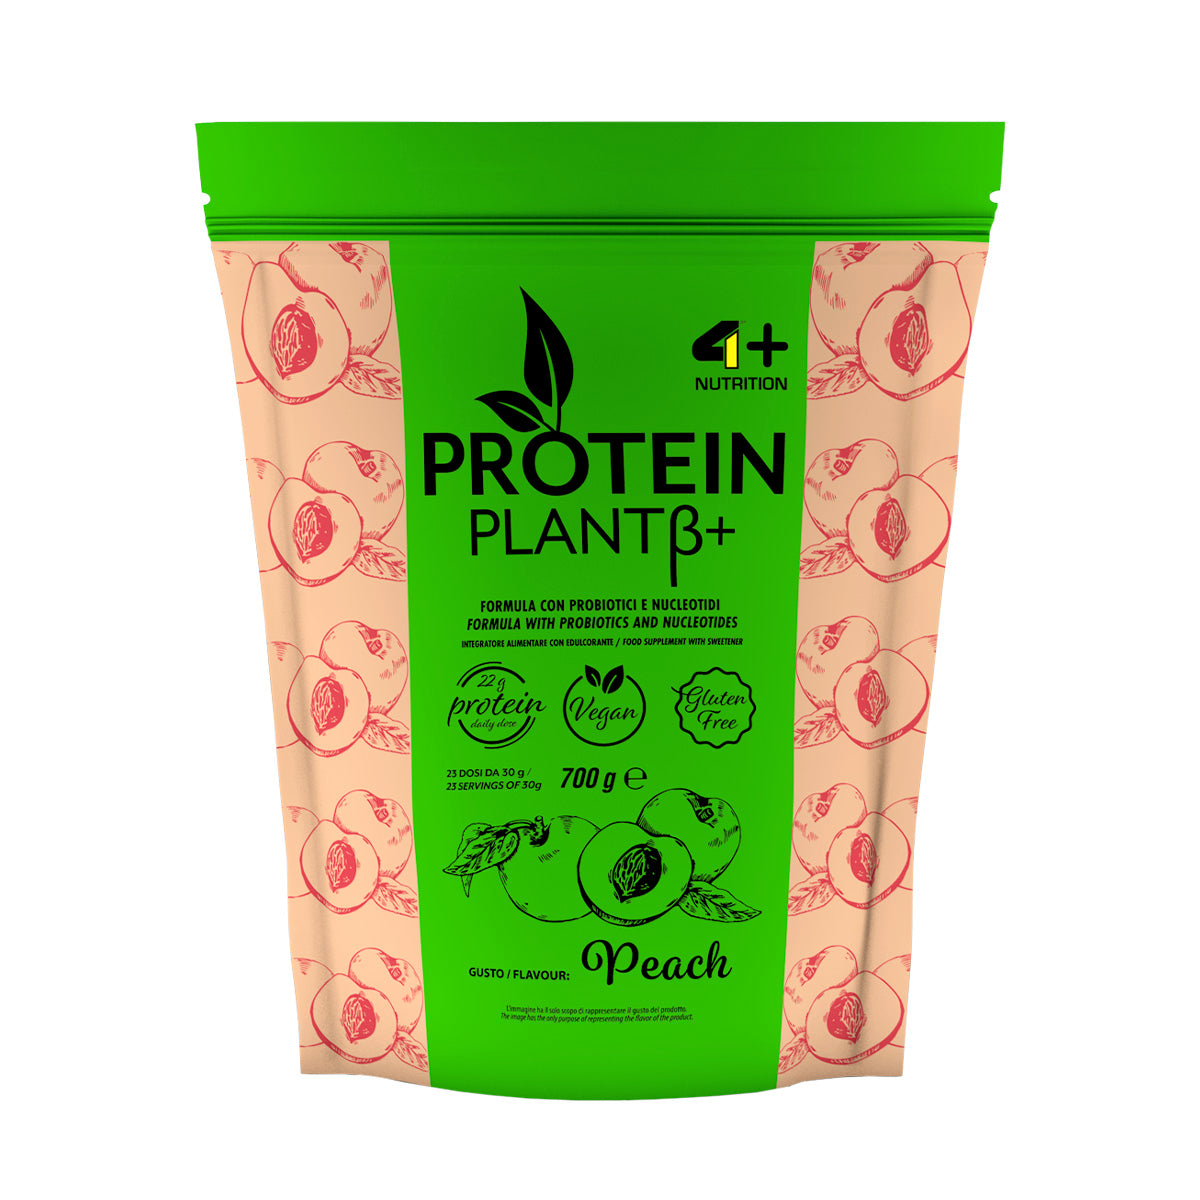 4+ Nutrition PROTEIN PLANT B+